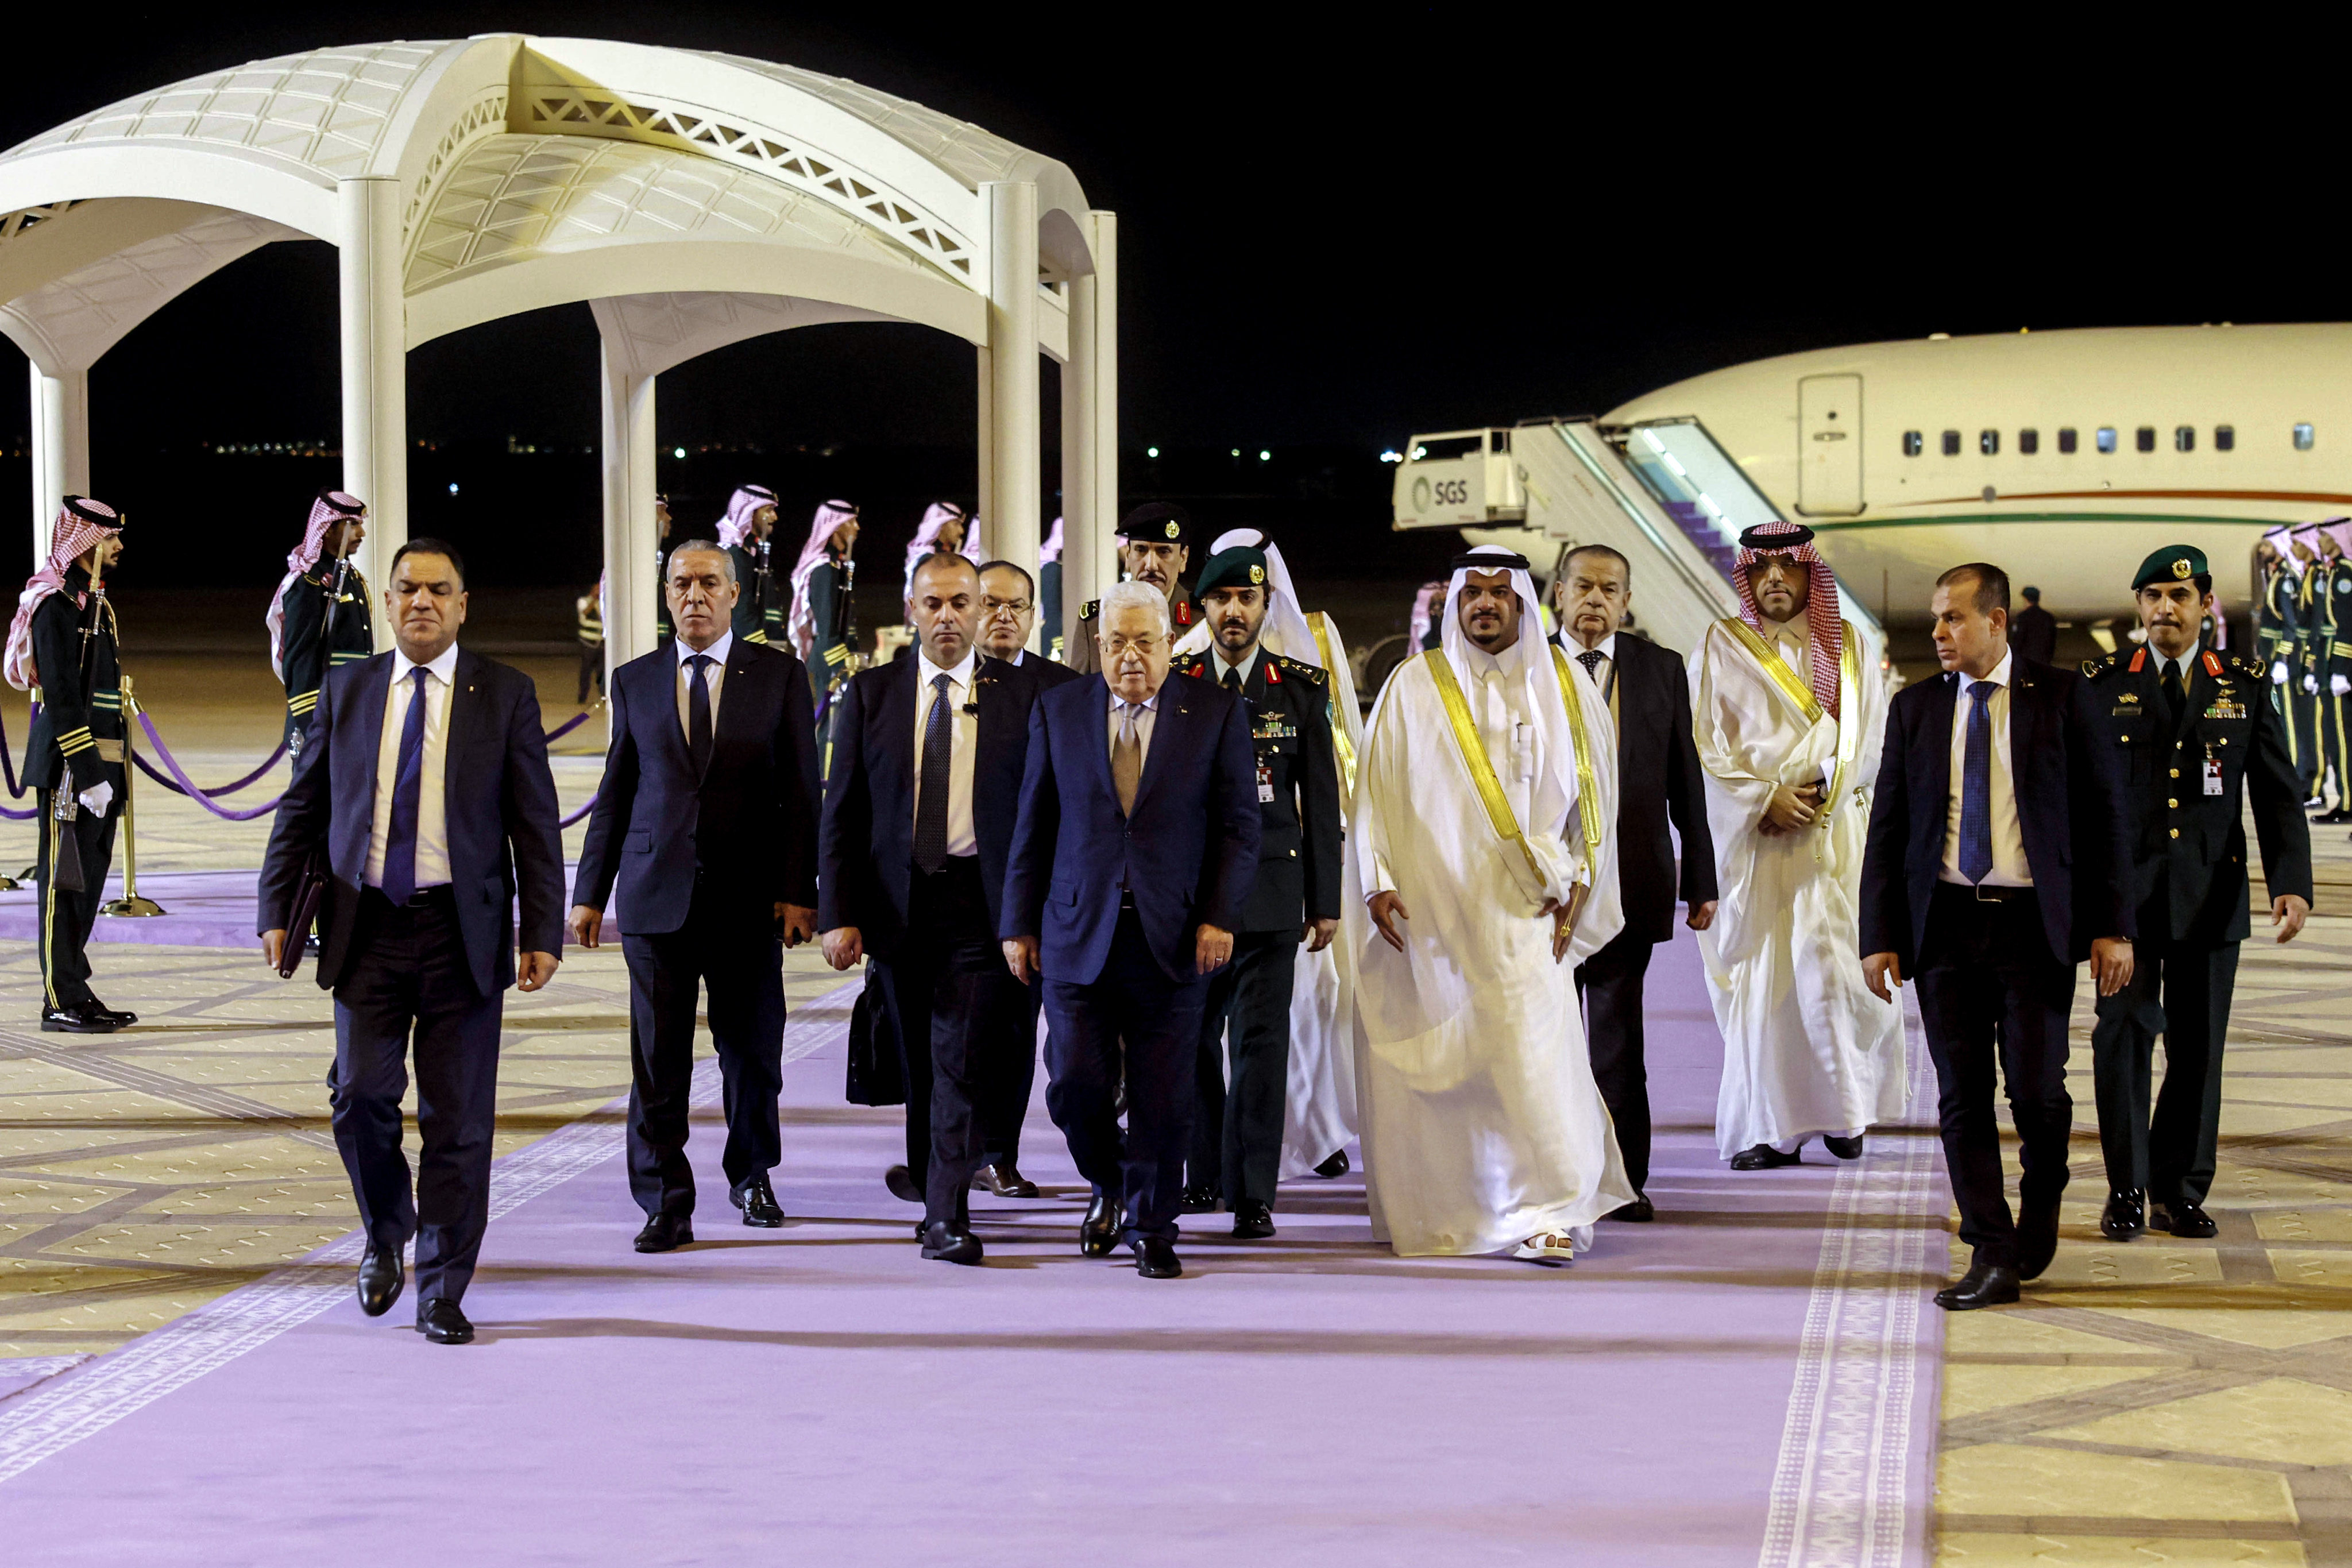 Palestinian president Mahmoud Abbas arrives in Riyadh ahead of the Arab League Emergency Summit to discuss the Israeli-Palestinian conflict. Photo: dpa